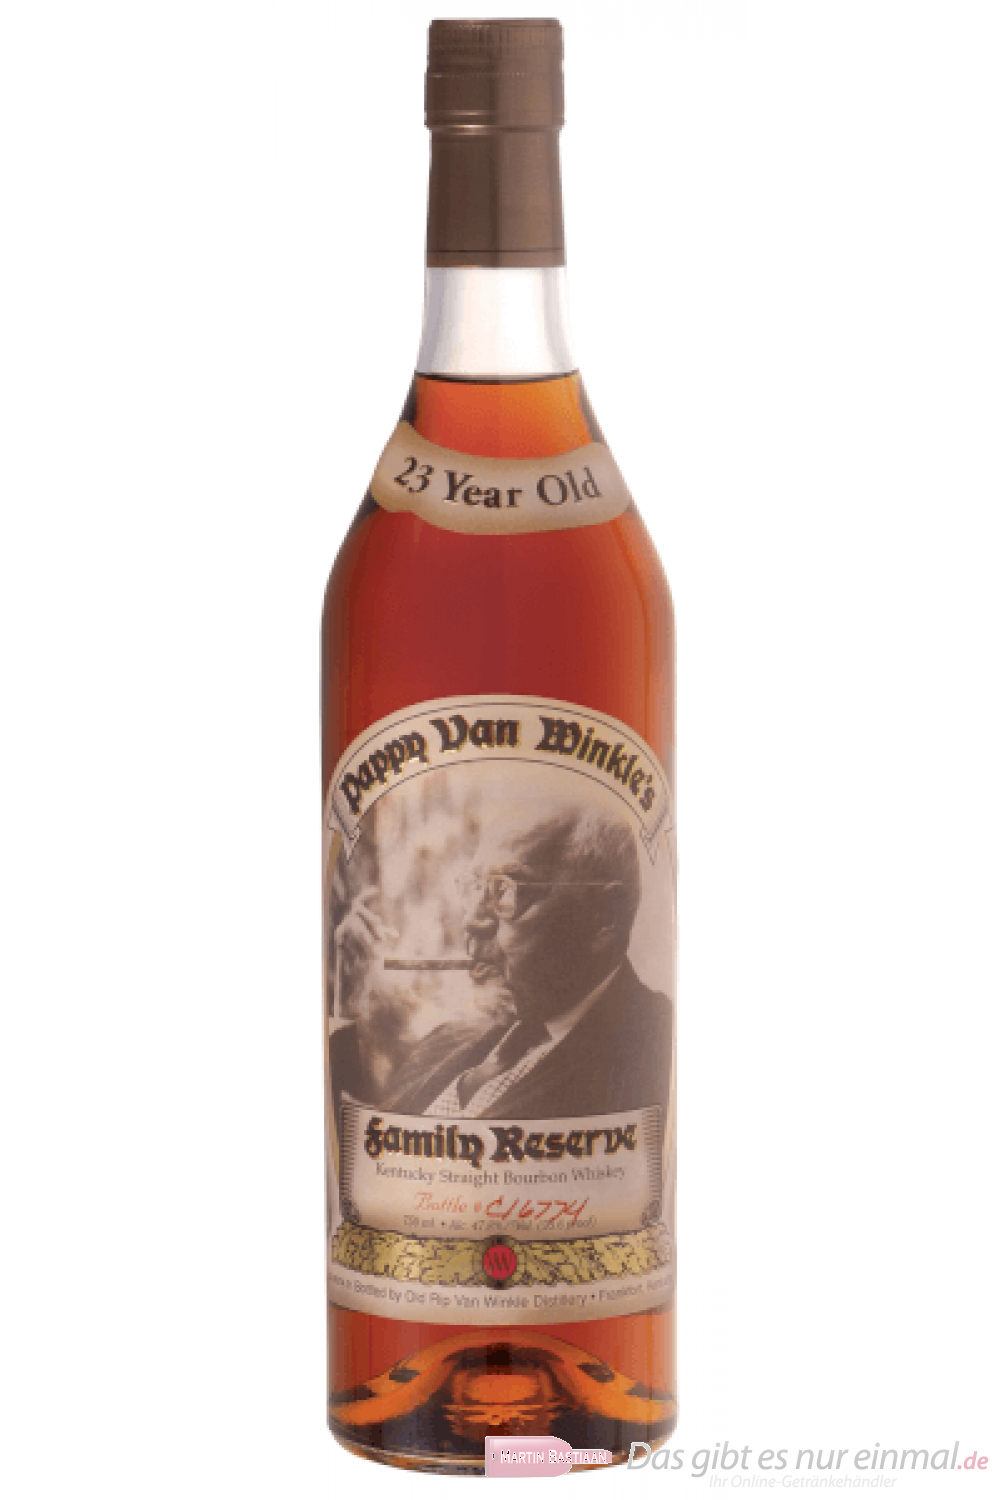 Pappy 23 year old bourbon